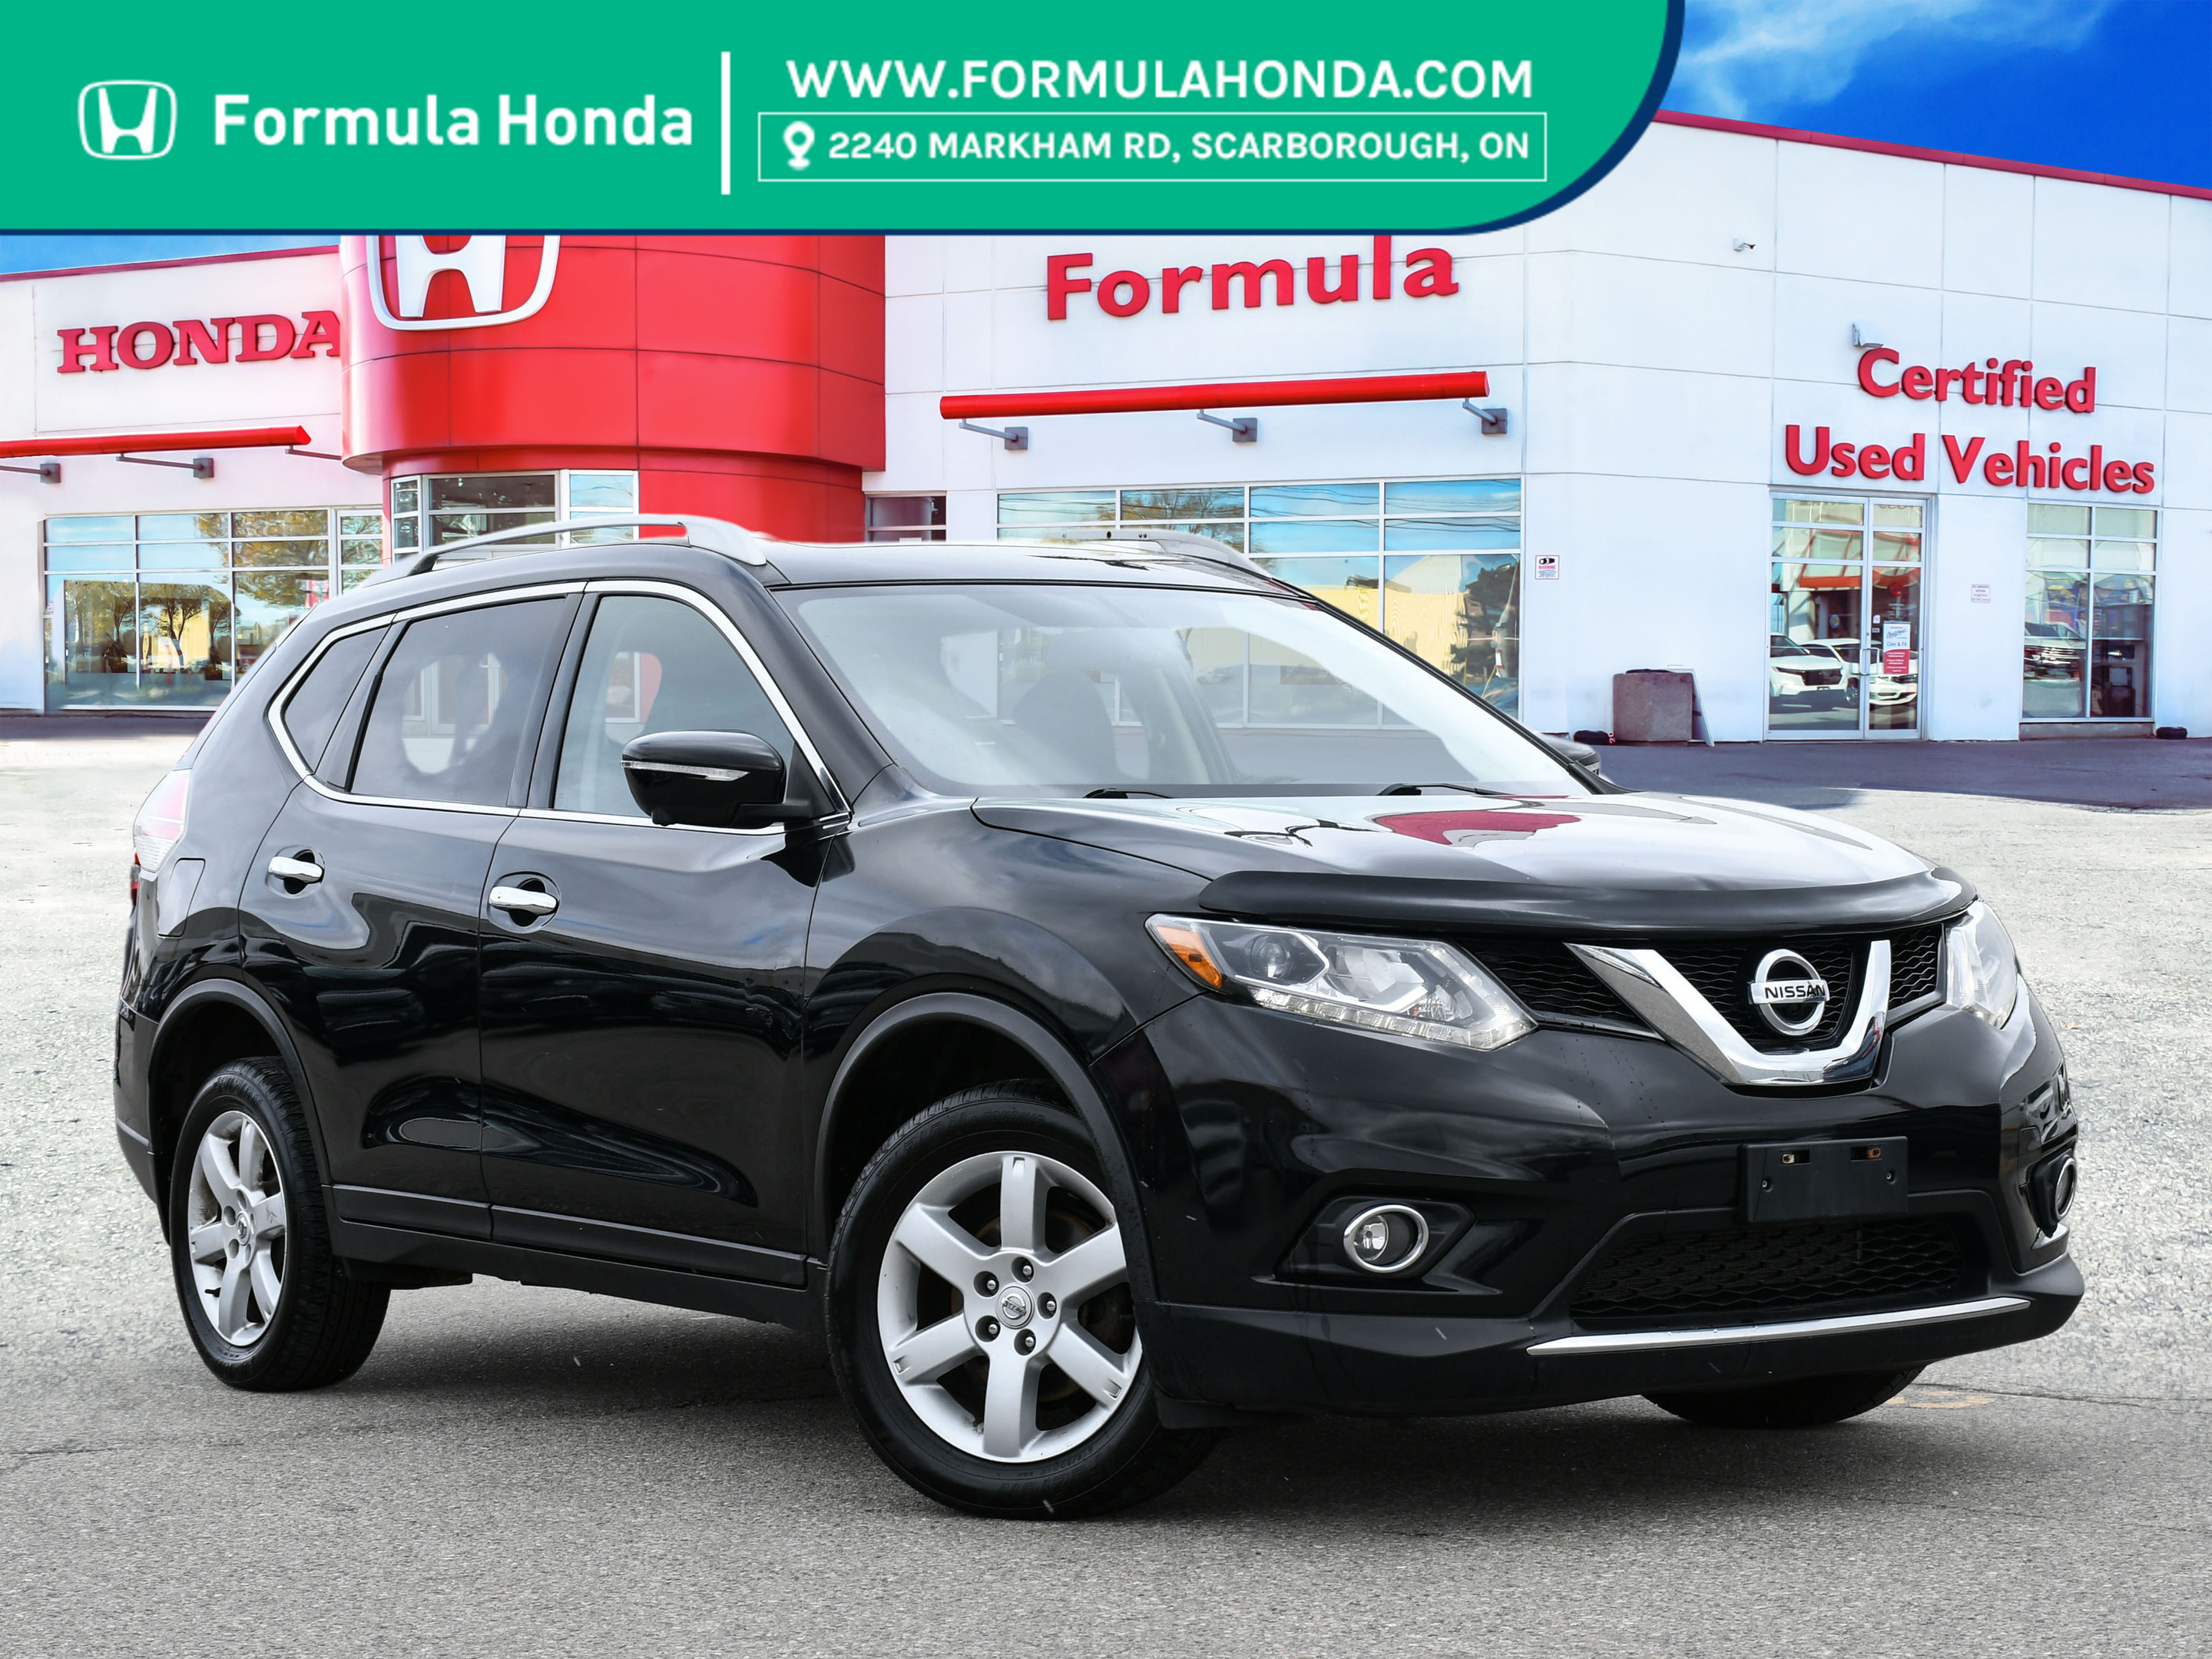 2015 Nissan Rogue SL AWD | AS-IS SL AWD | AS-IS SL AWD | AS-IS